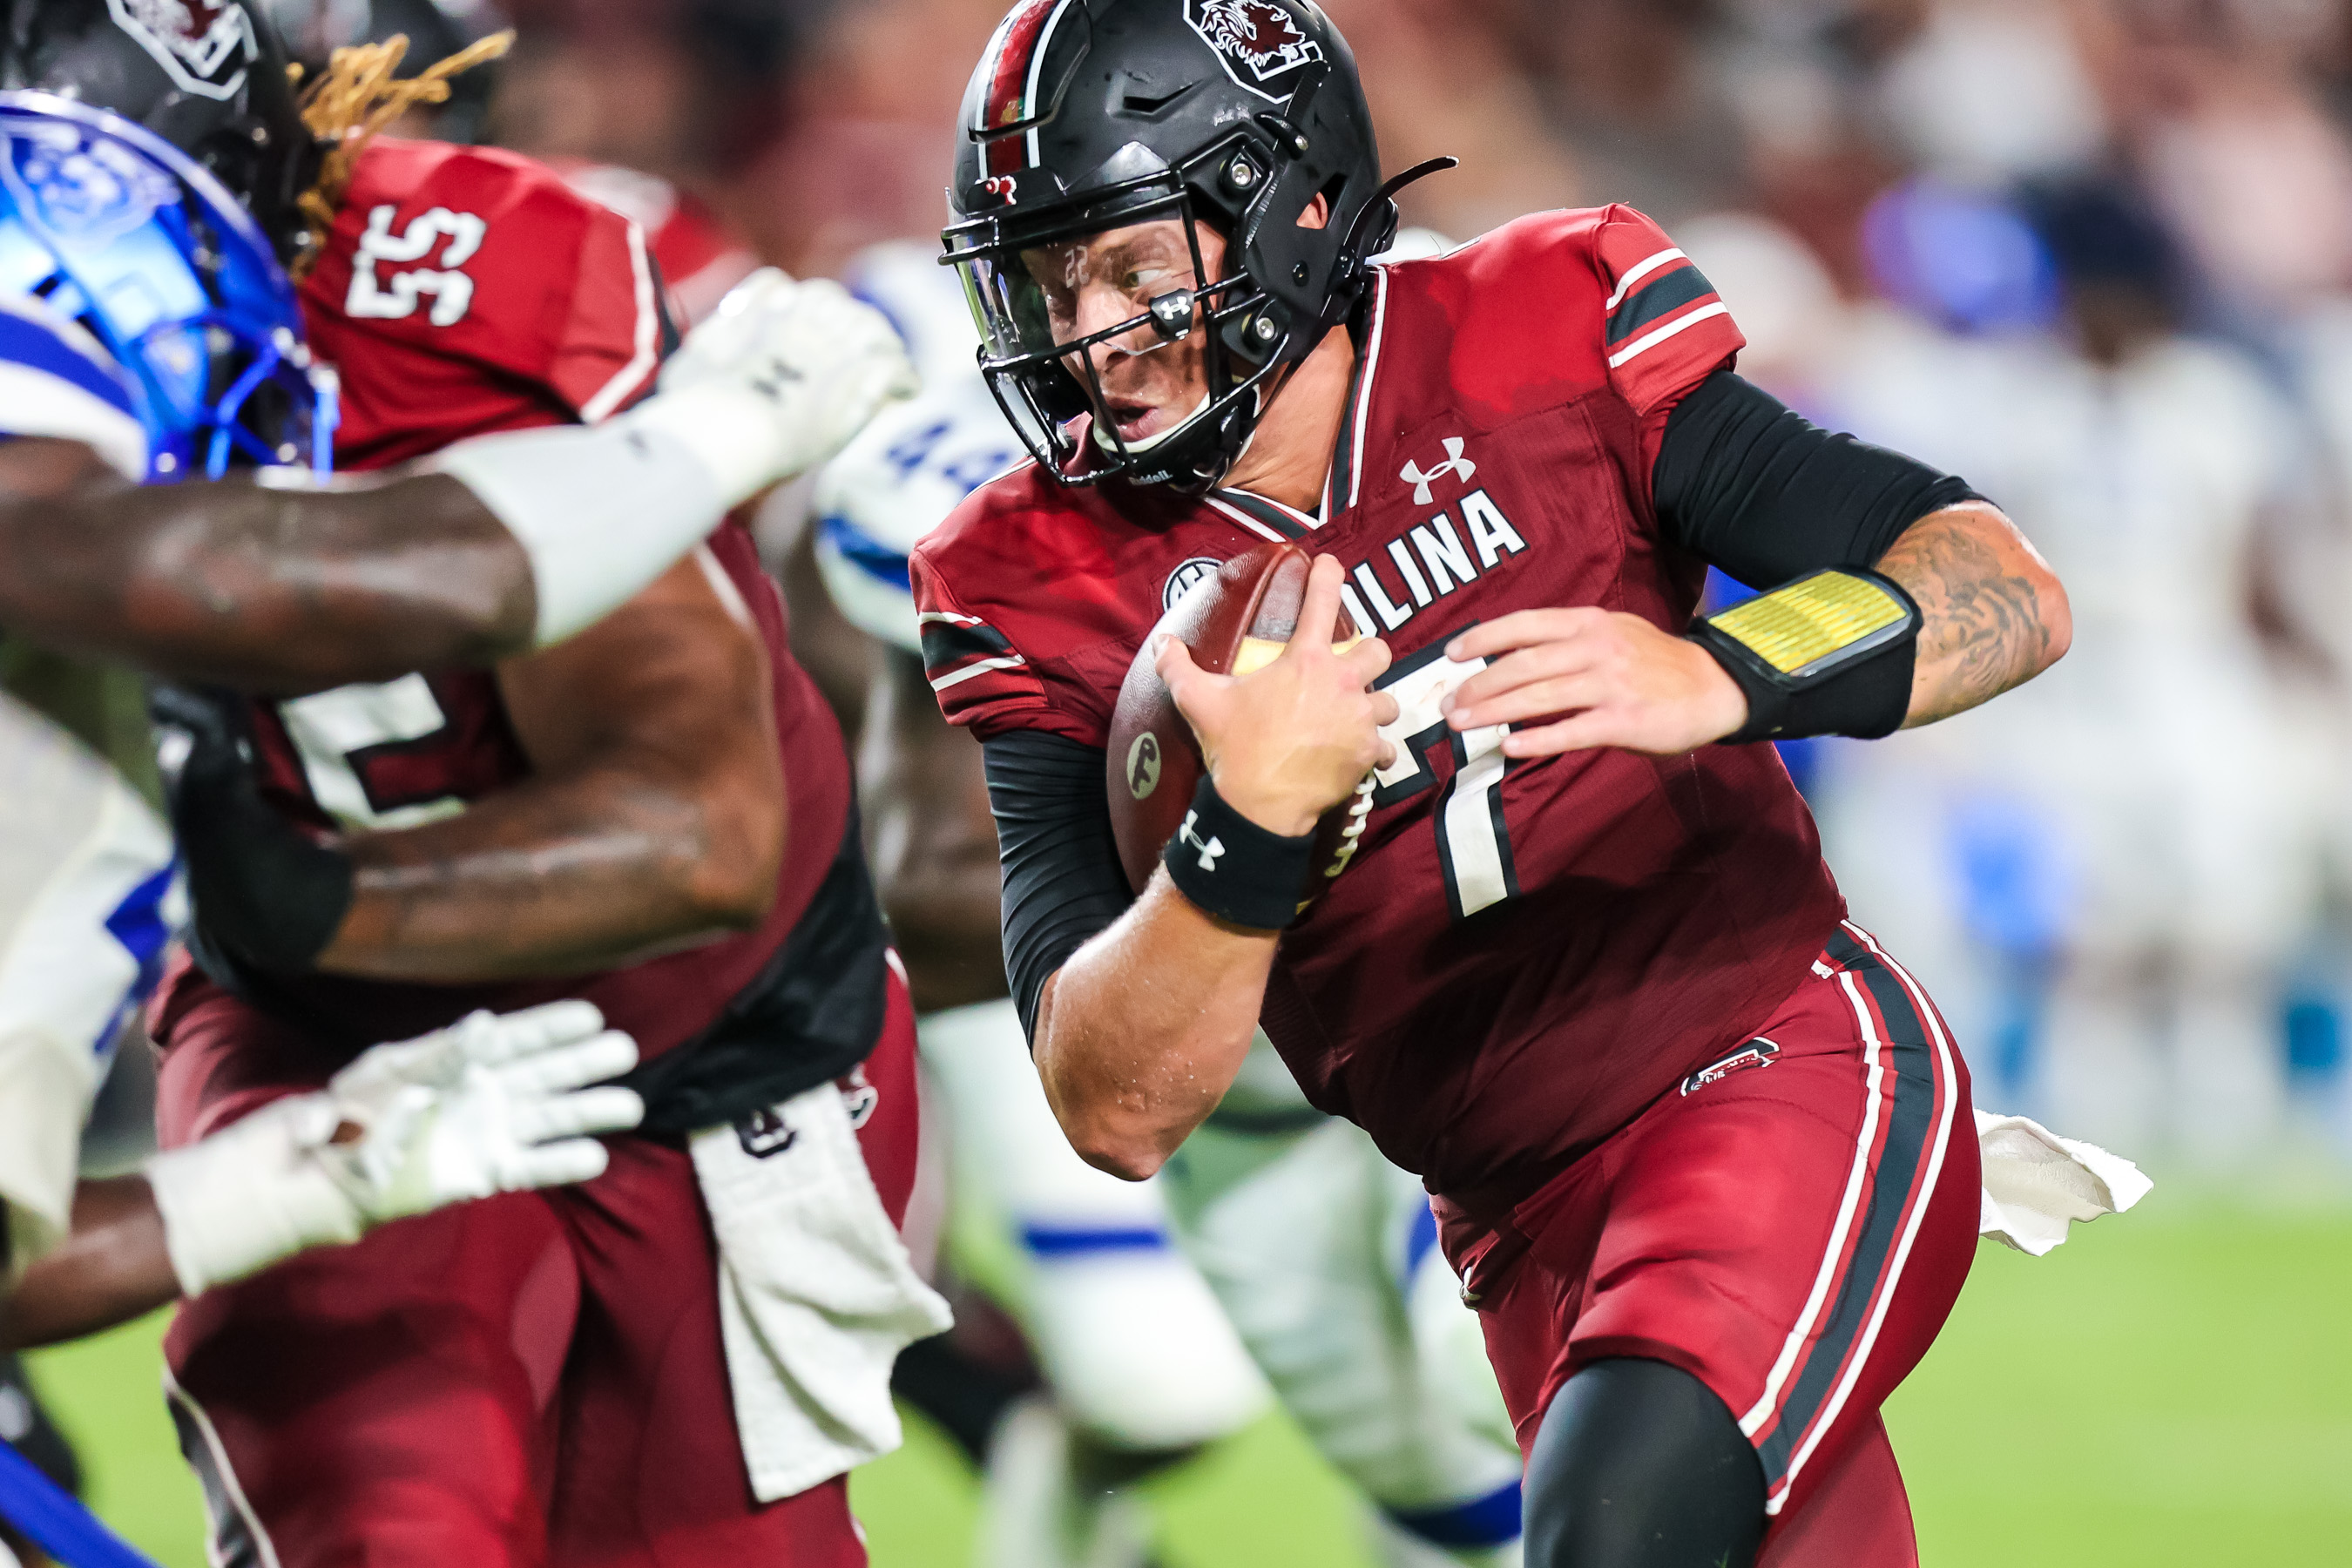 South Carolina's Spencer Rattler Has Most To Gain Sports Illustrated